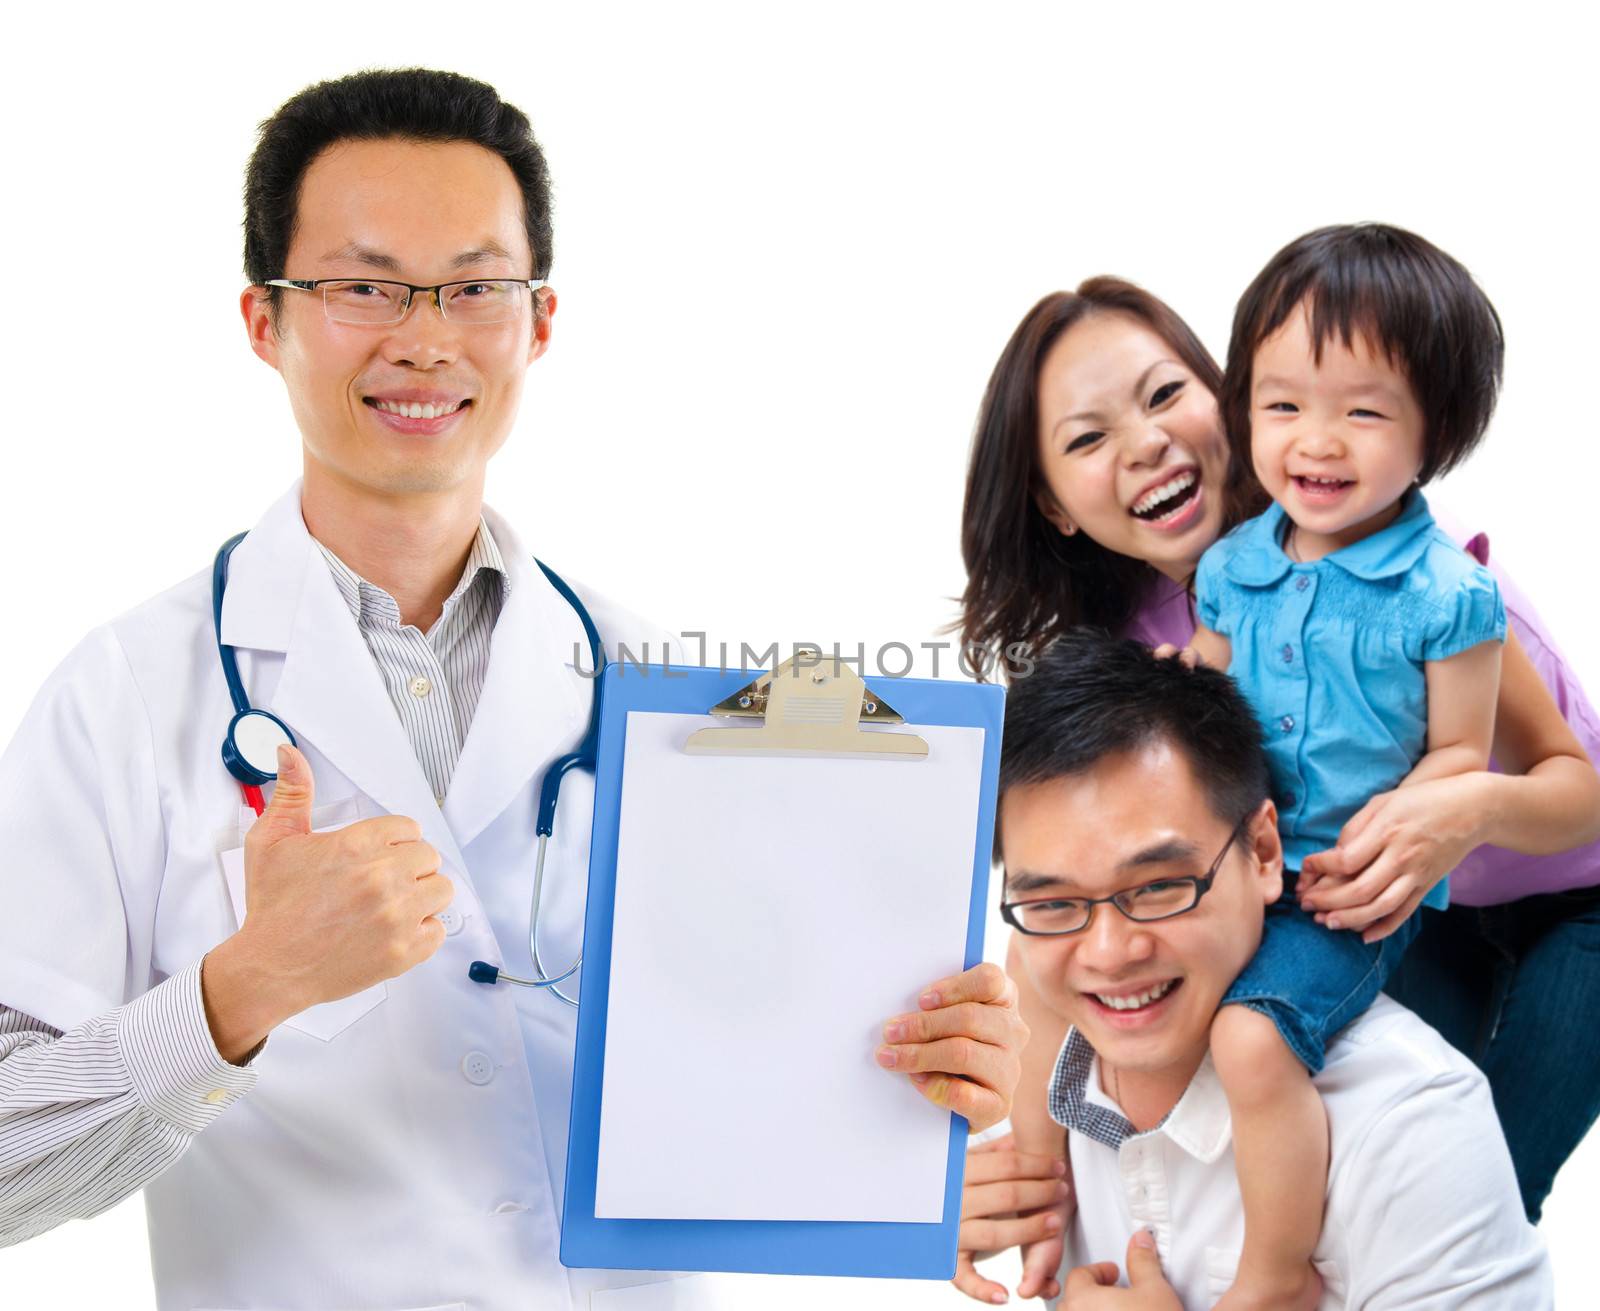 Smiling friendly Chinese male medical doctor and young patient family. Health care concept. Isolated on white background.